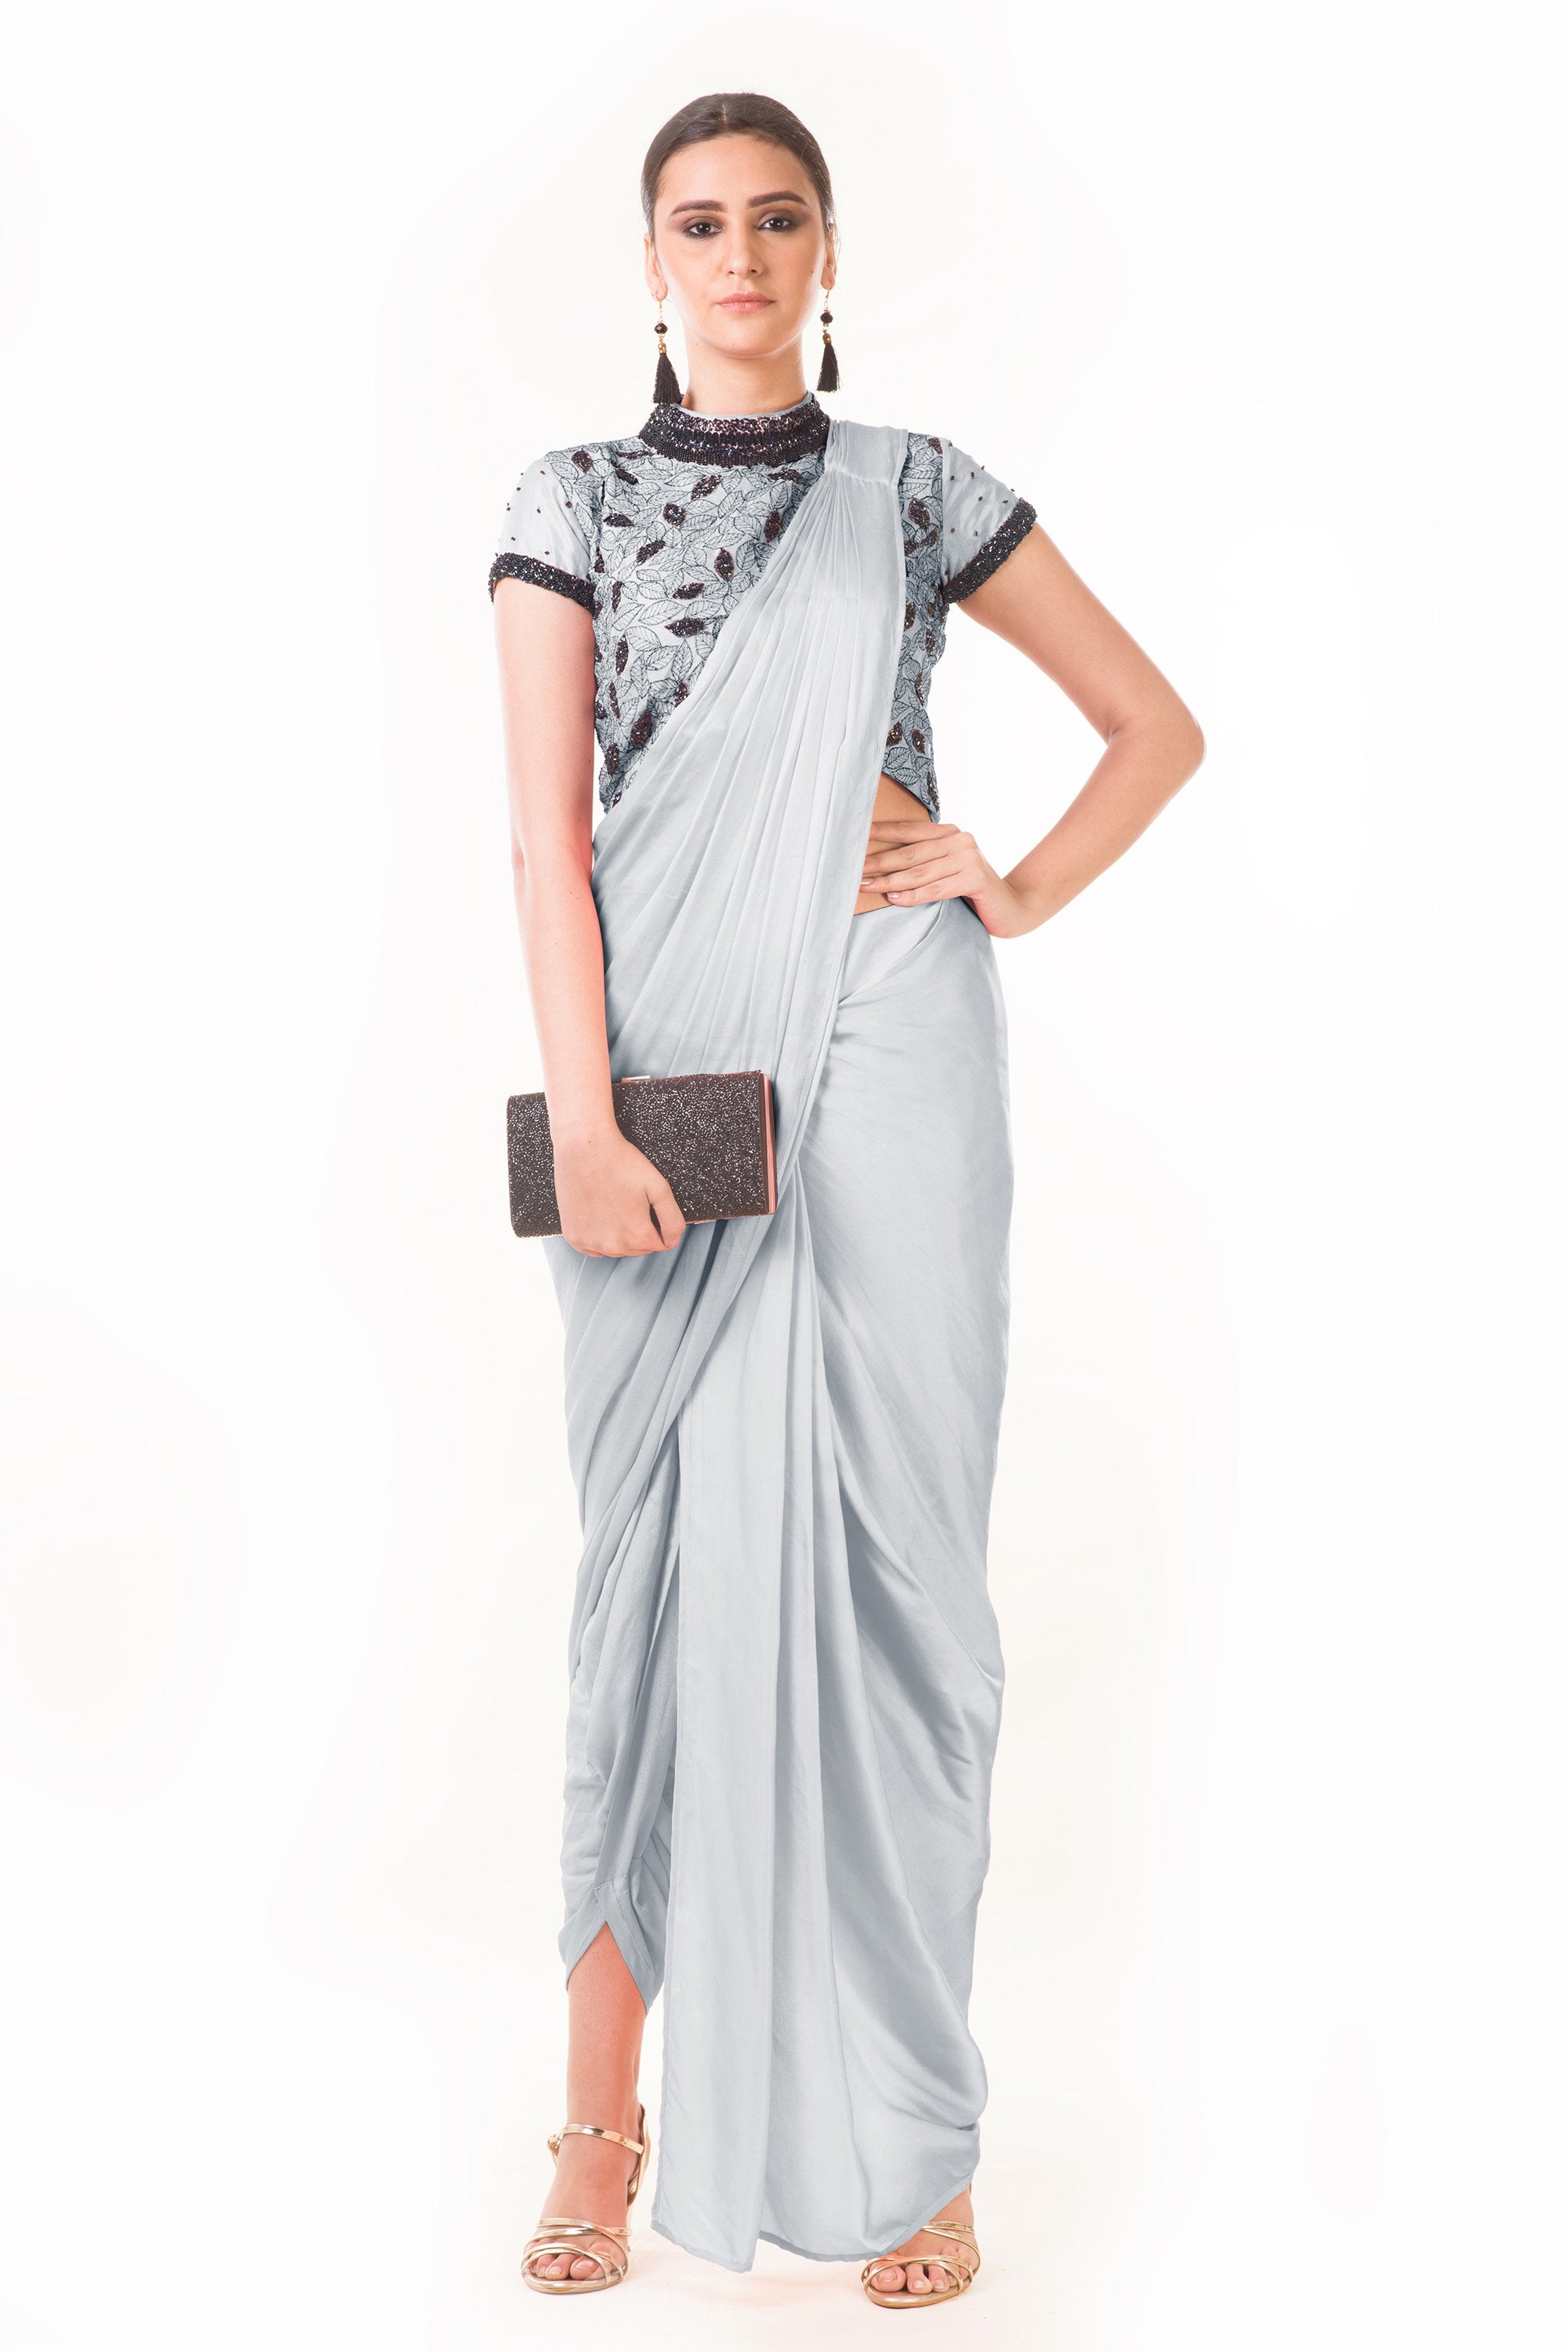 HOW TO WEAR A SAREE IN DHOTI STYLE | Readiprint Fashions Blog